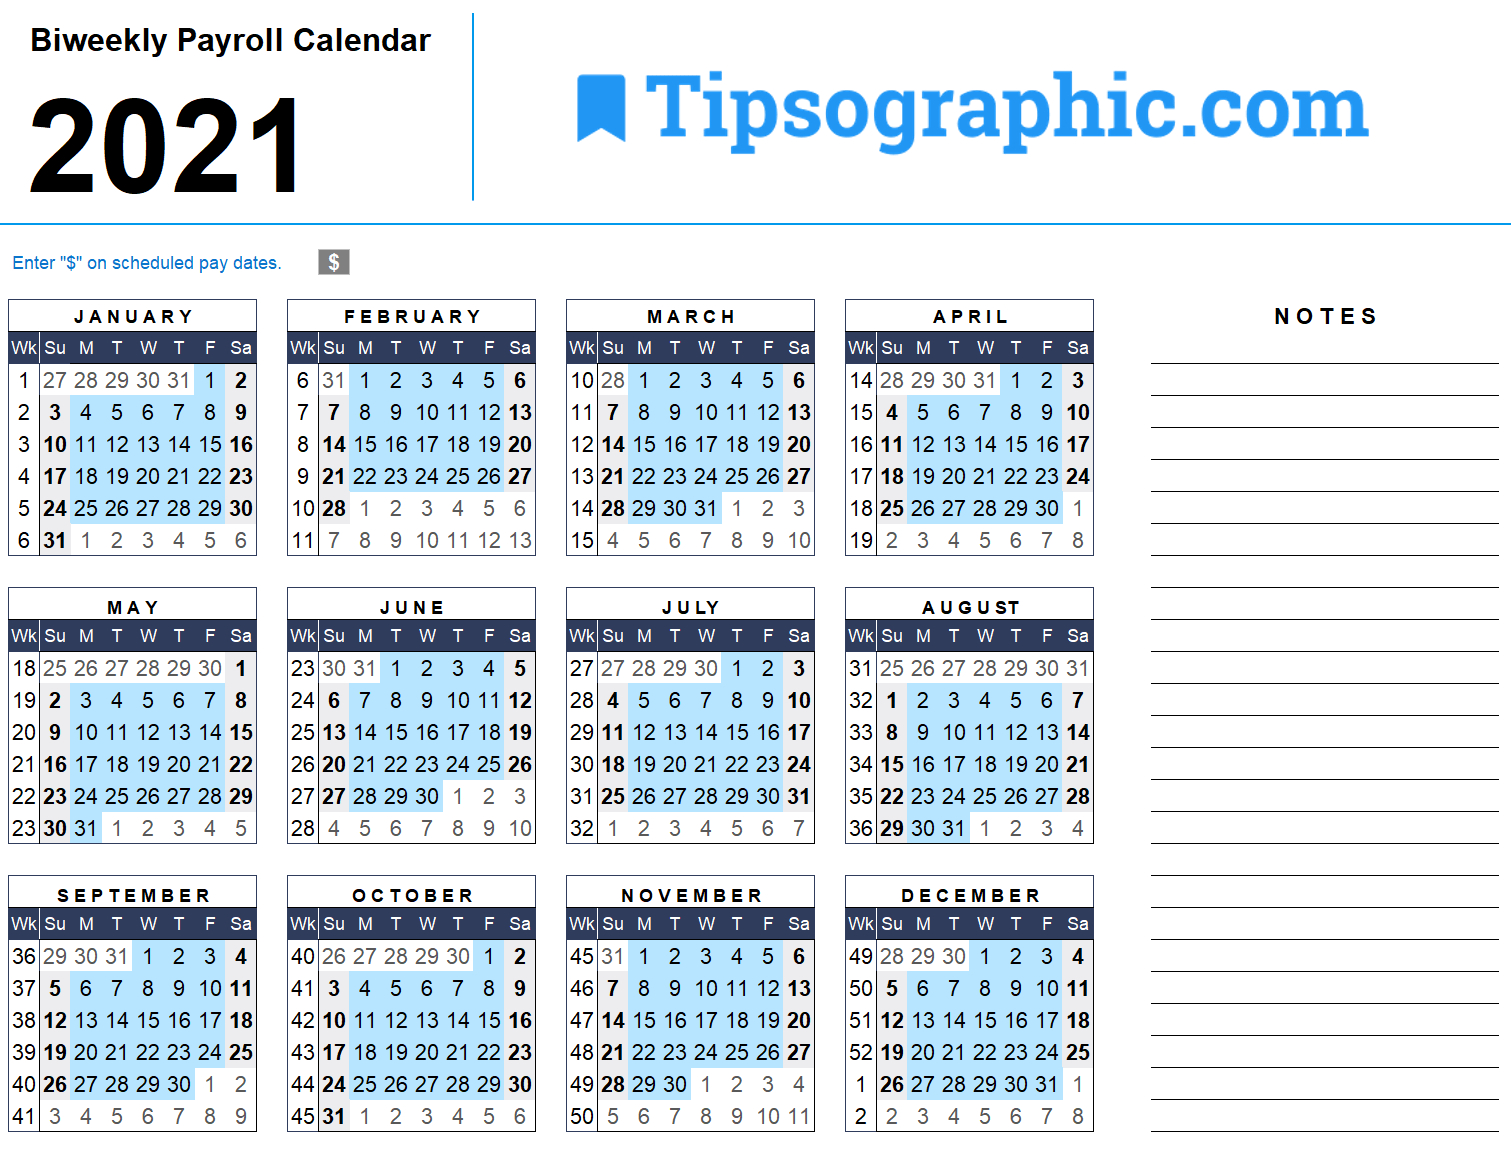 Download The 2021 Biweekly Payroll Calendar | Tipsographic-Excel Vacation Schedule 2021